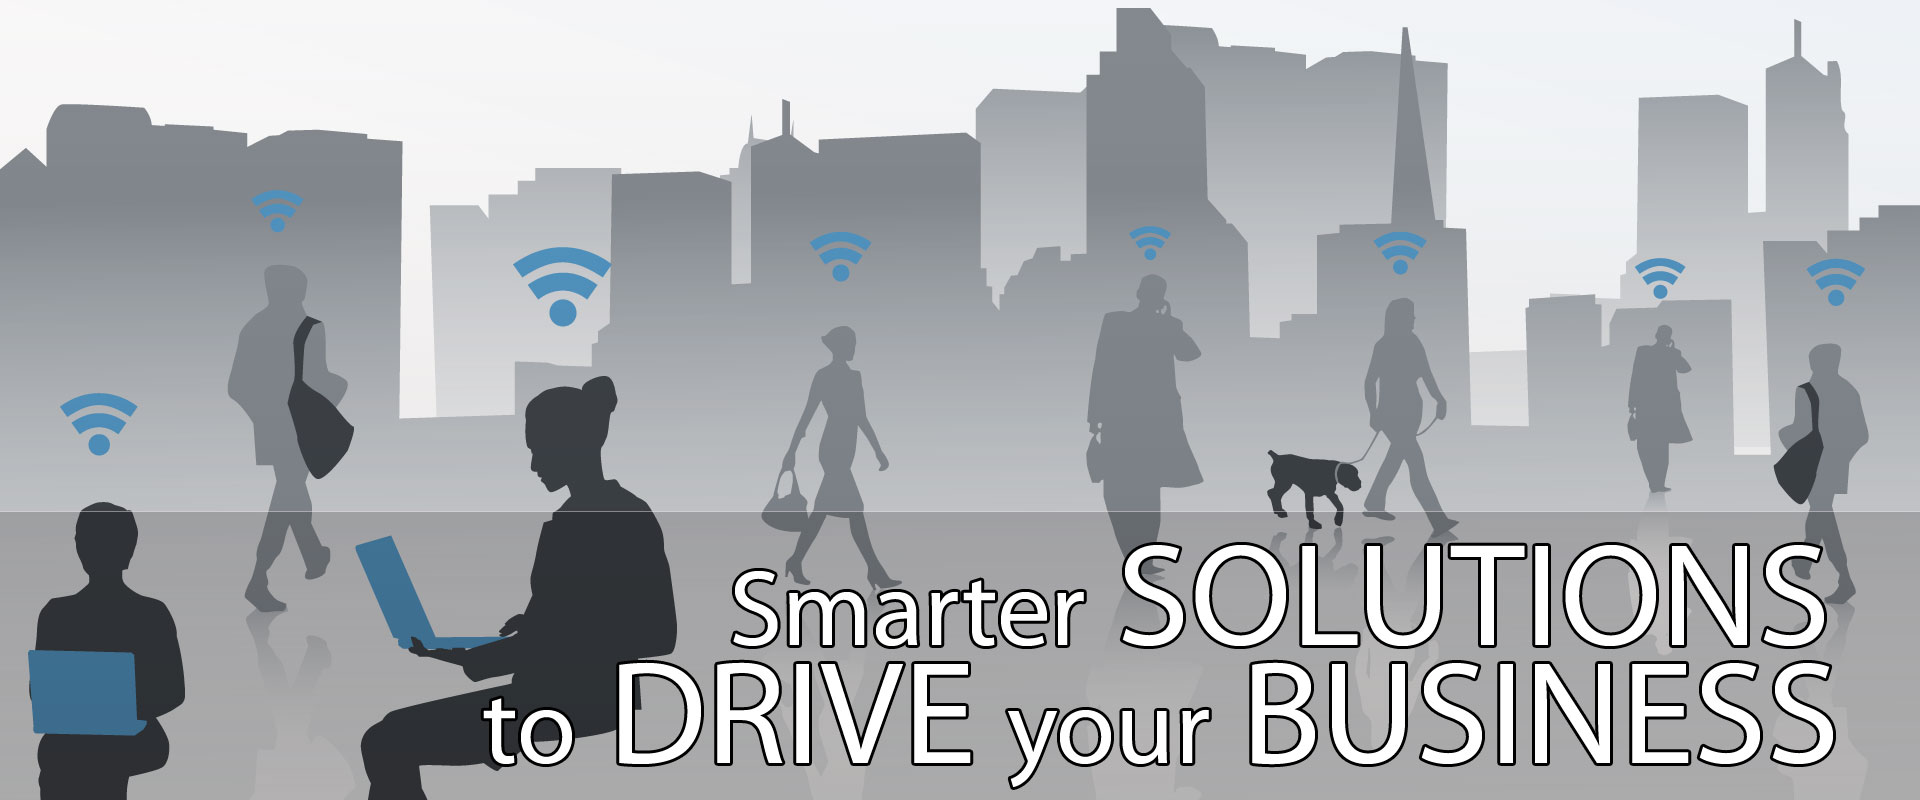 Smarter Solutions to Drive your Business